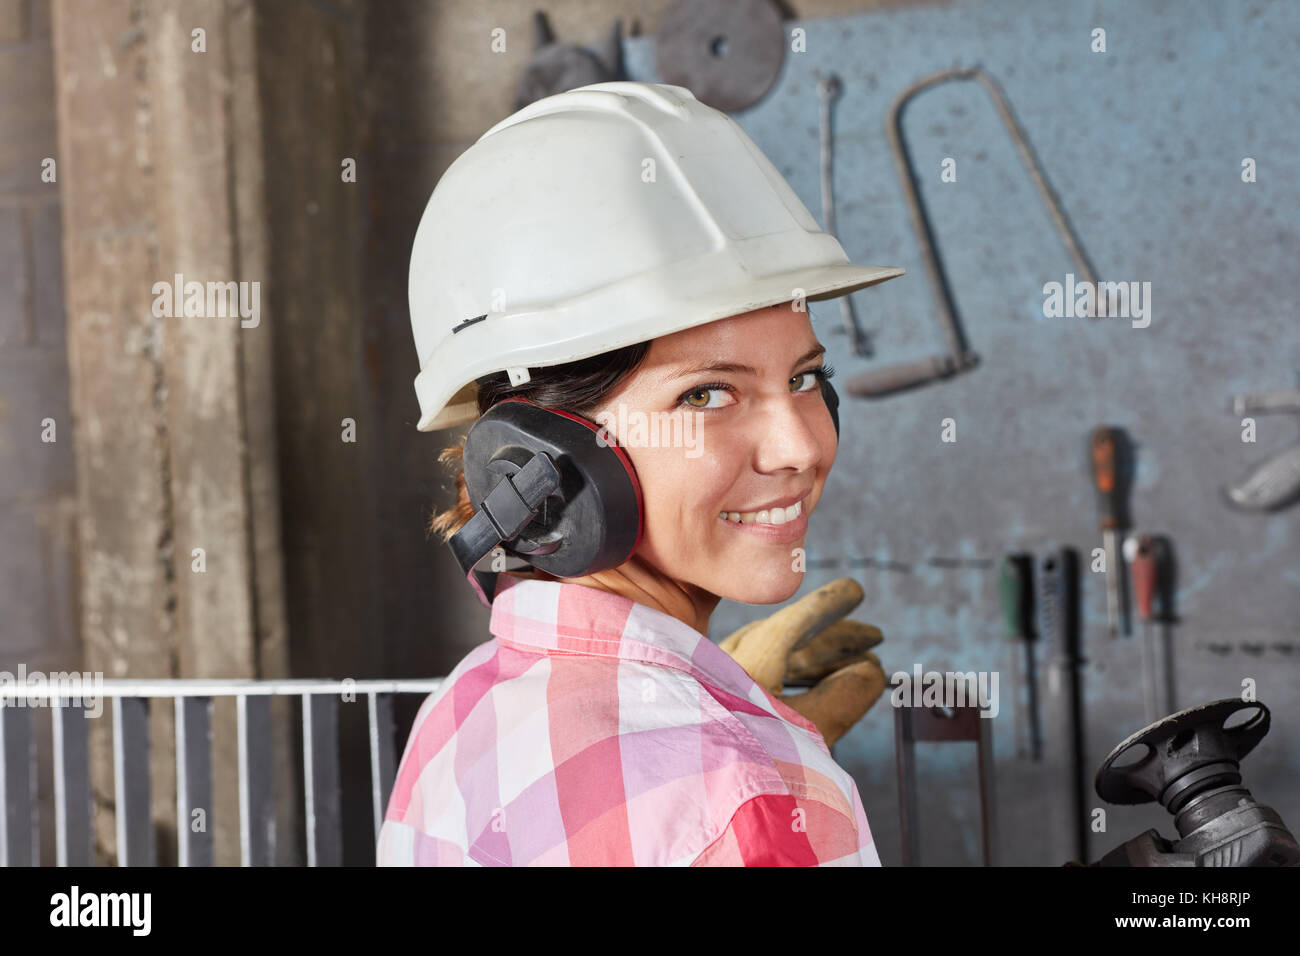 Woman as worker apprentice with ear protection and hardhat as labor safety concept Stock Photo